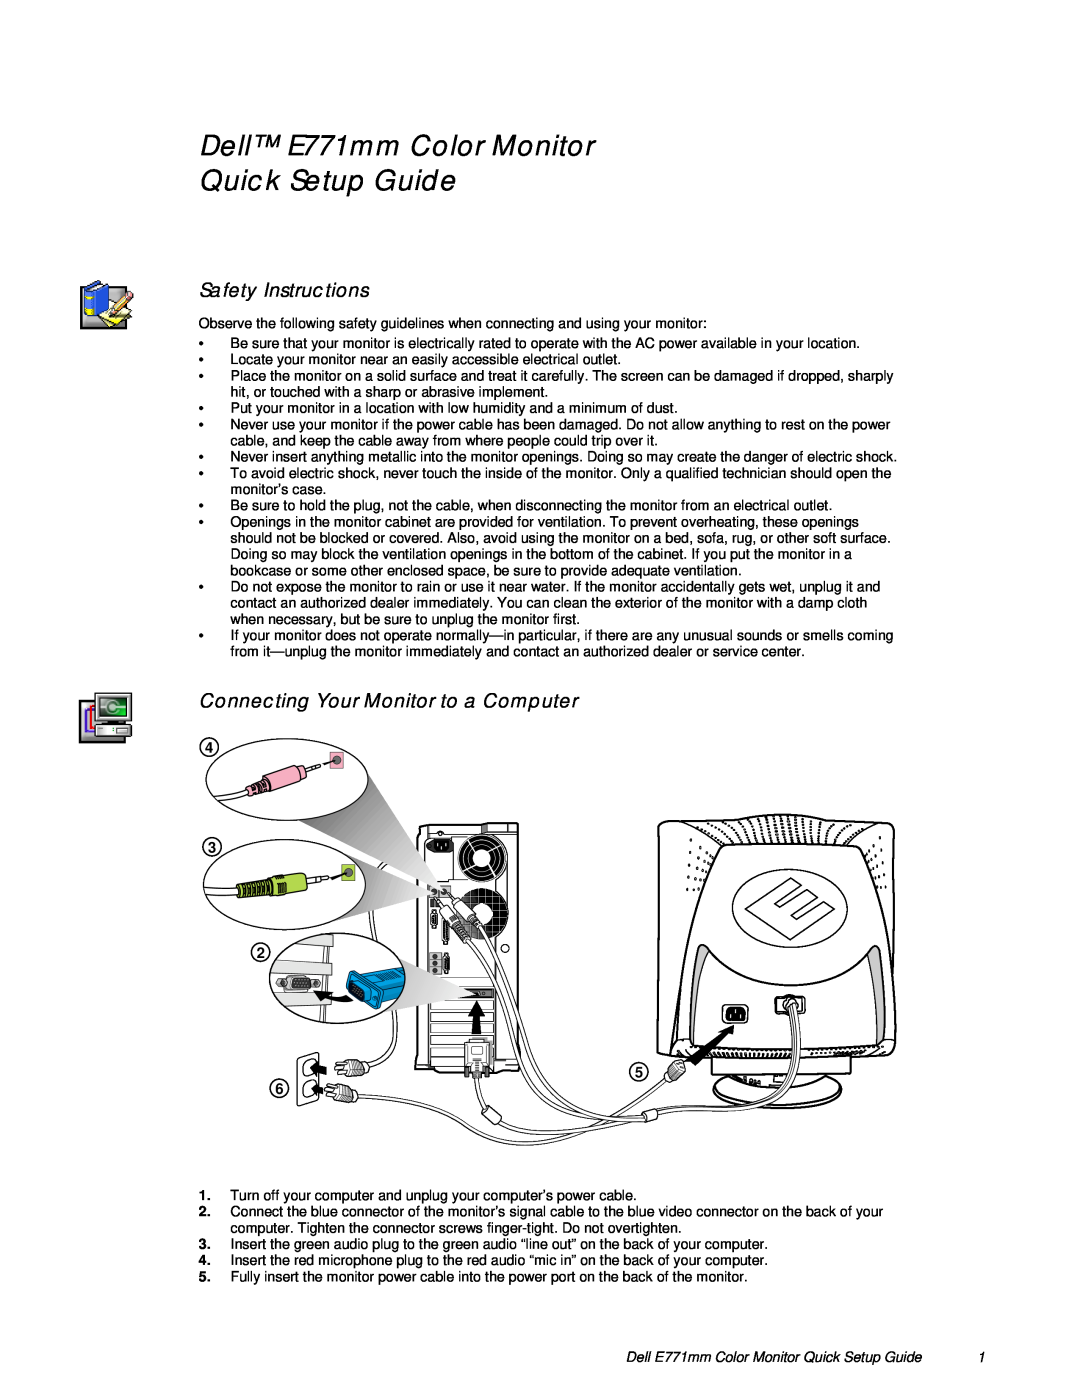 Dell E771MM setup guide Safety Instructions, Connecting Your Monitor to a Computer 